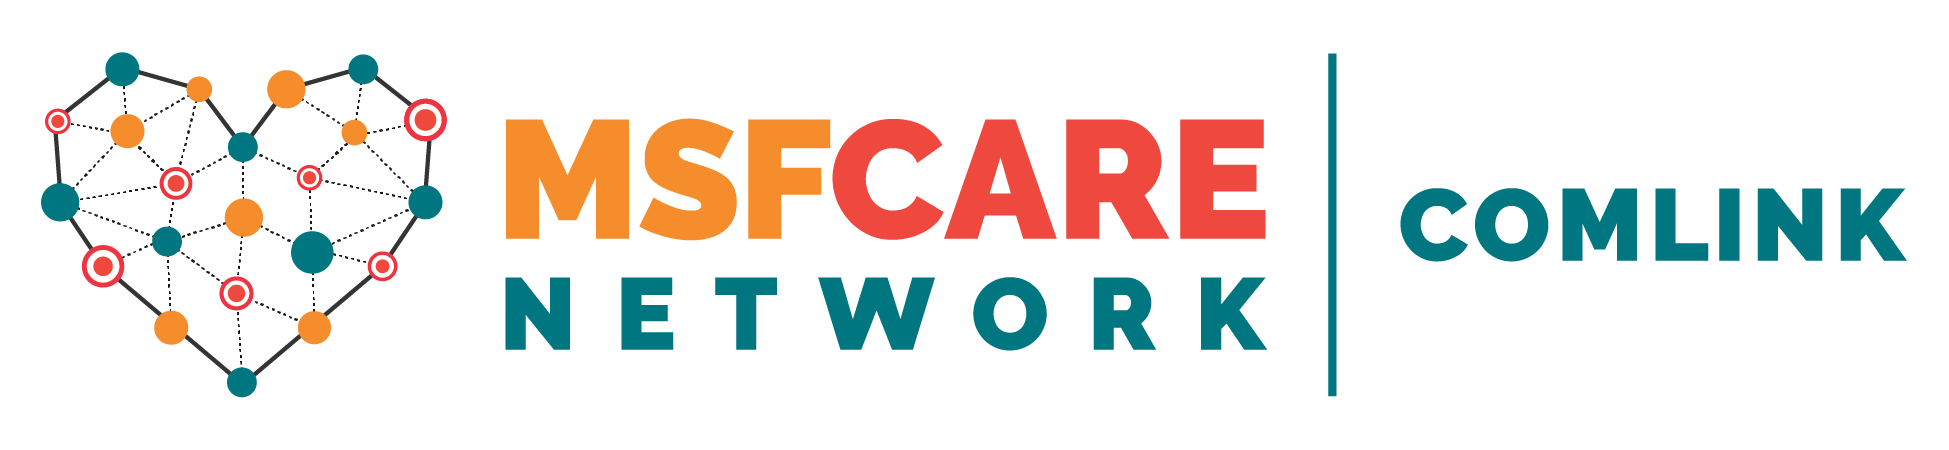 msf care network